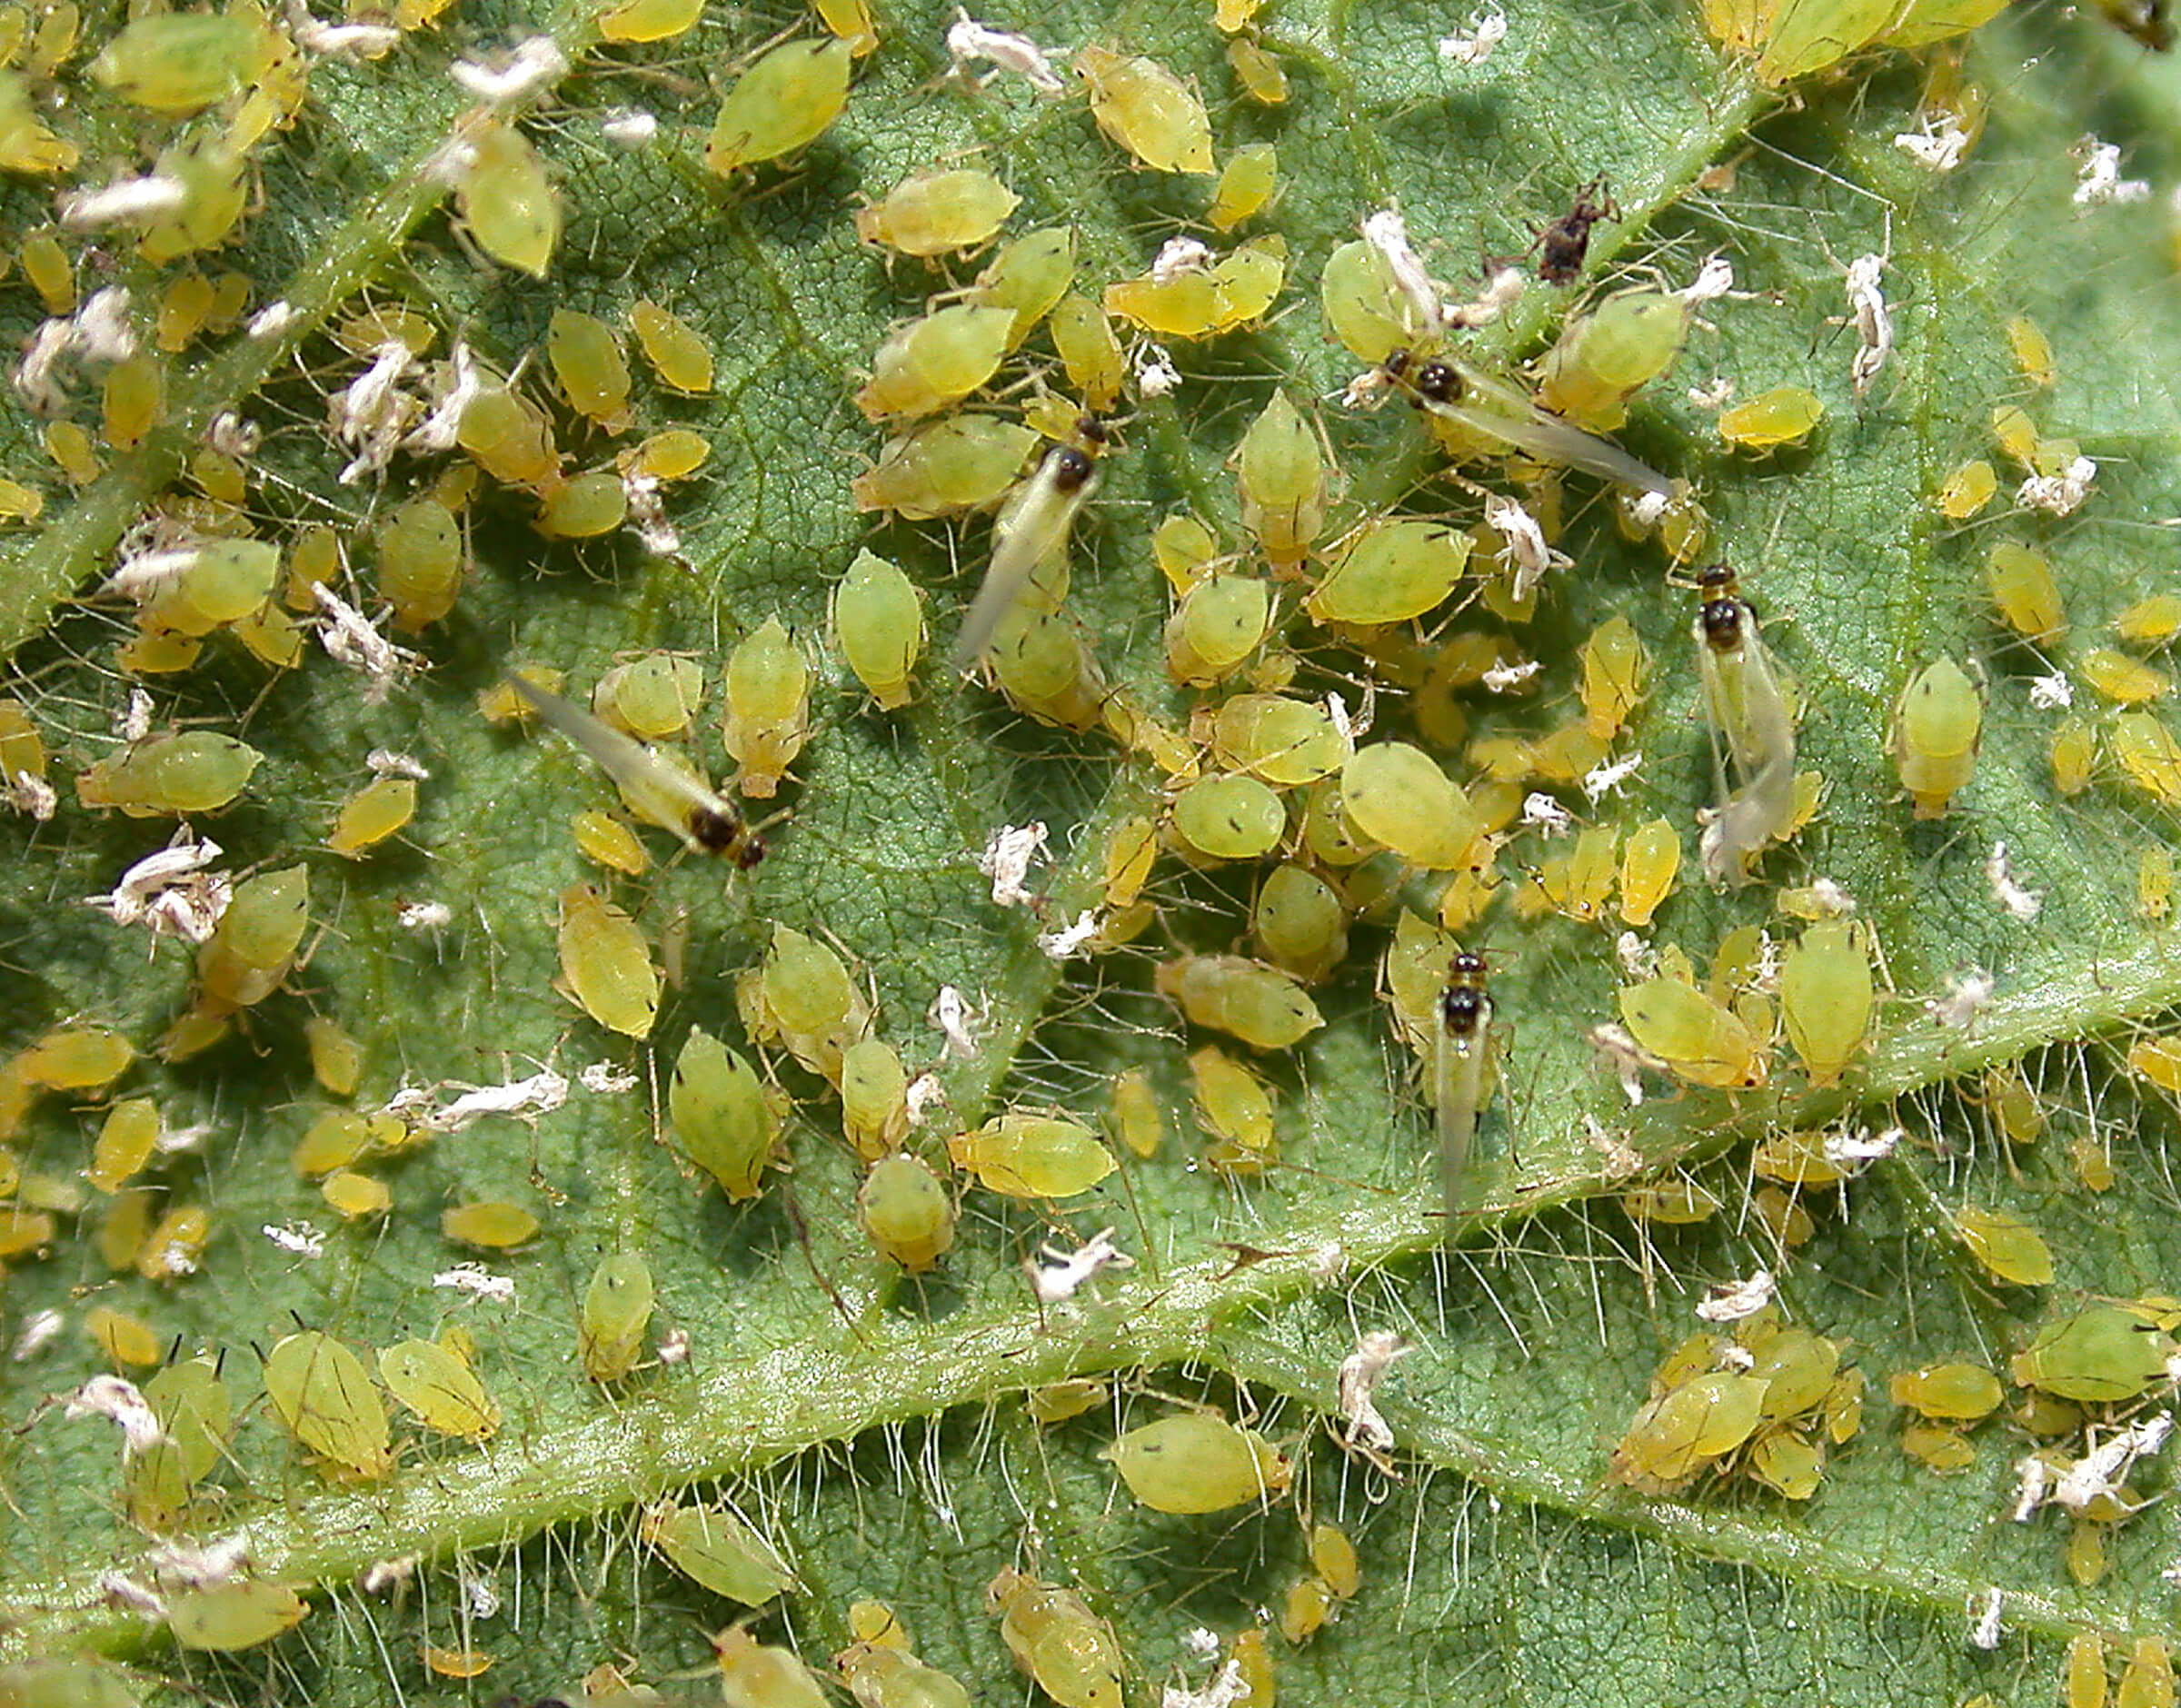 As part of a two-year study covering seven states, extension specialists measured the effectiveness of commonly used insecticides against soybean aphids. (Purdue University Entomology Extension)